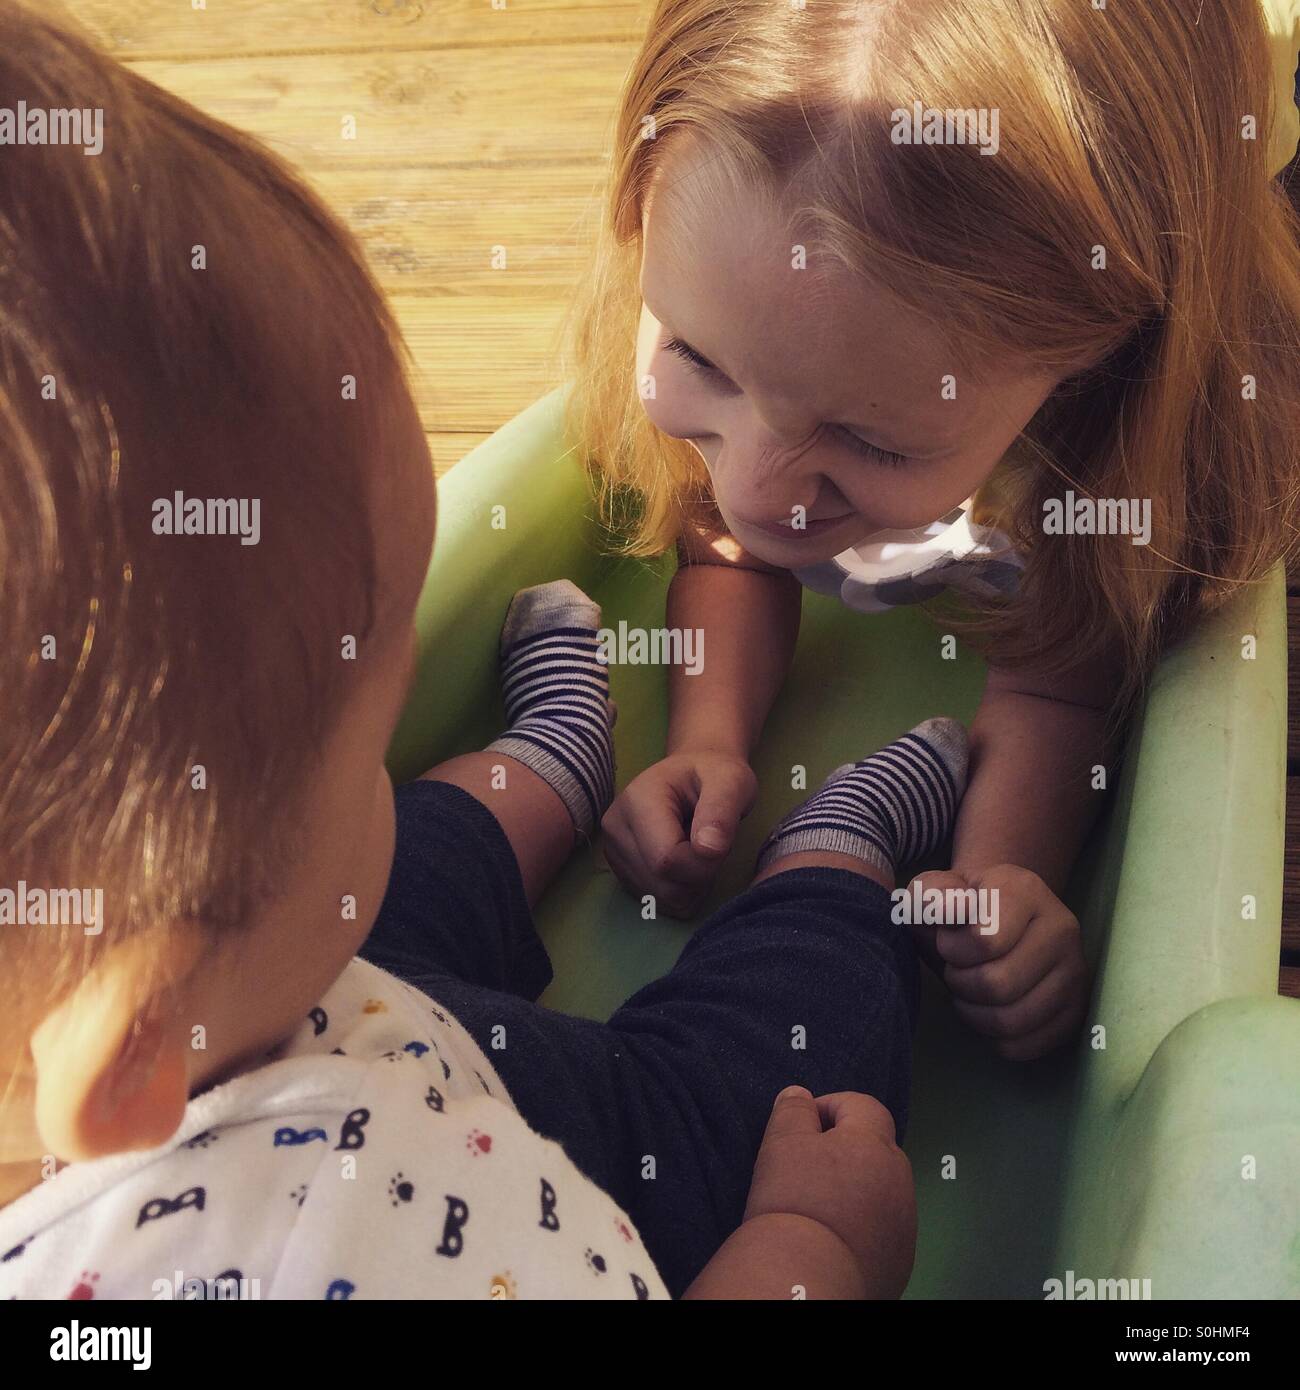 Girl helping her baby brother on a slide Stock Photo